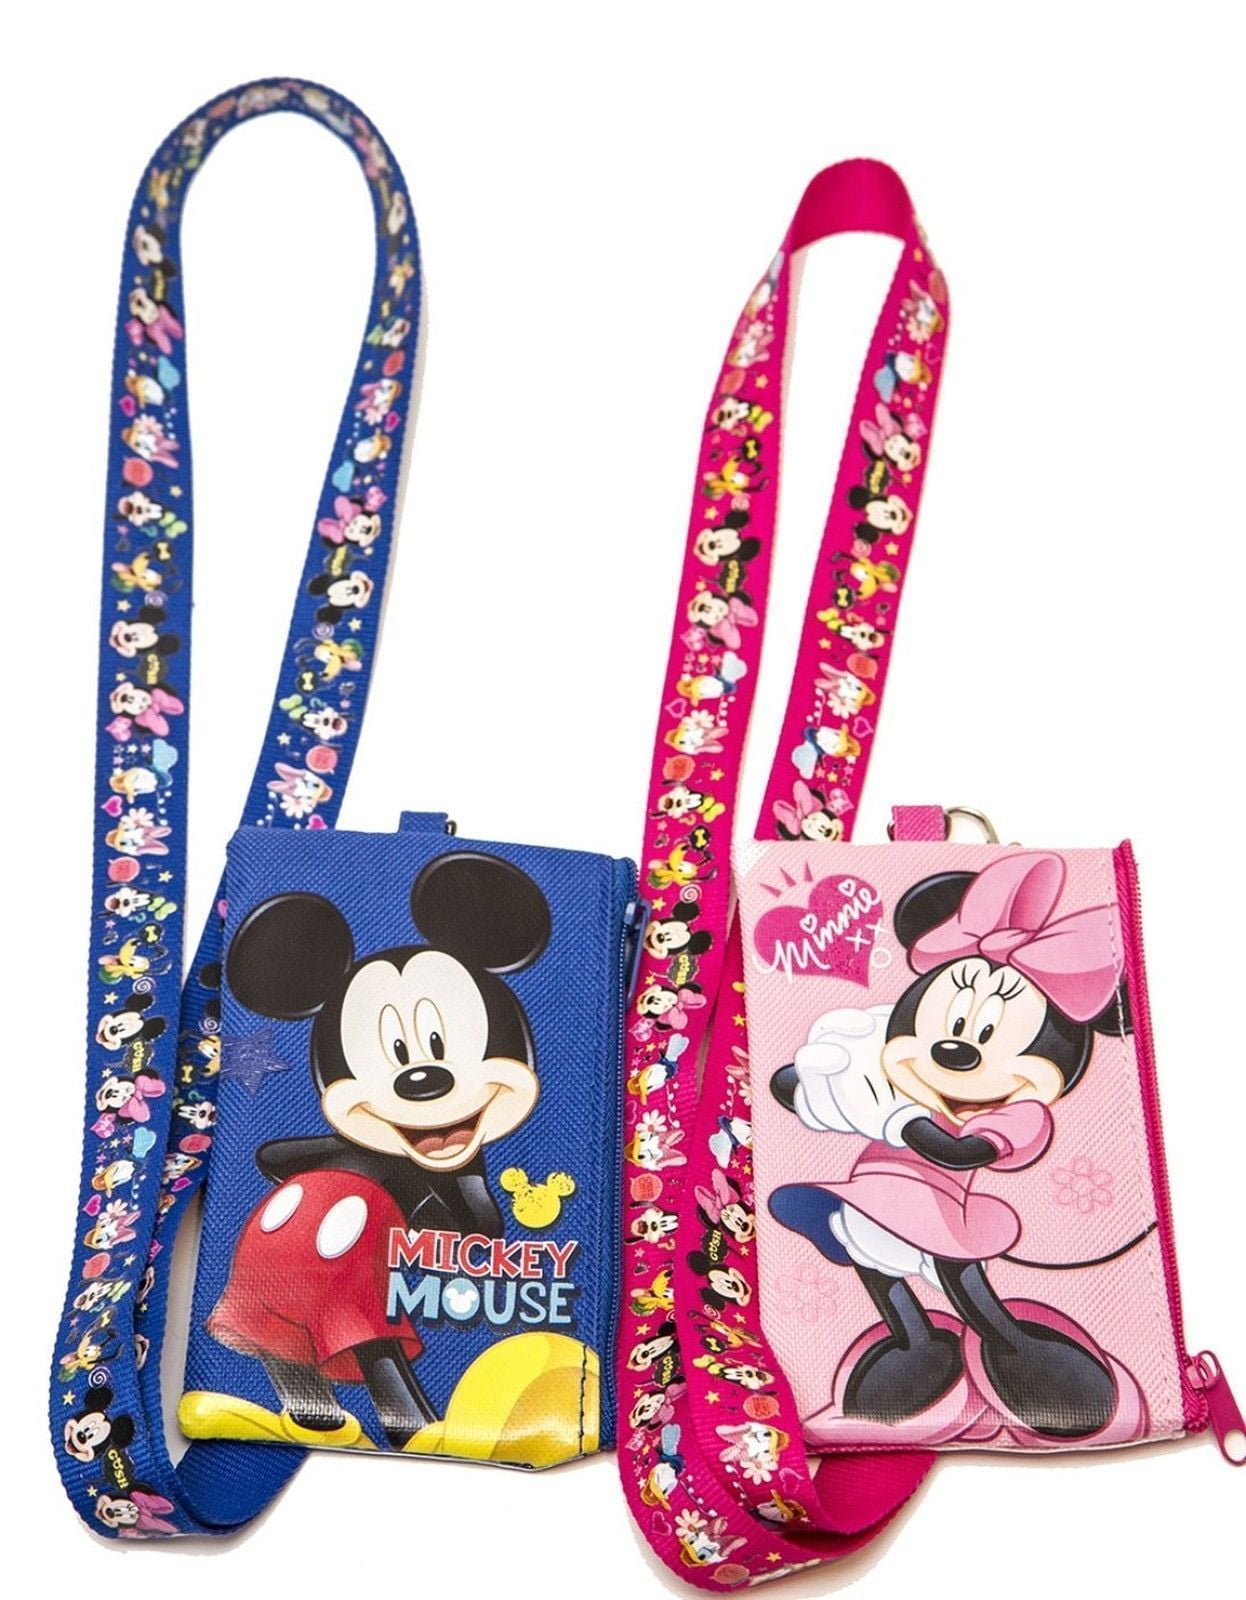 Disney Mickey Lanyard Fastpass ID Ticket Holders with Detachable Coin Purse 